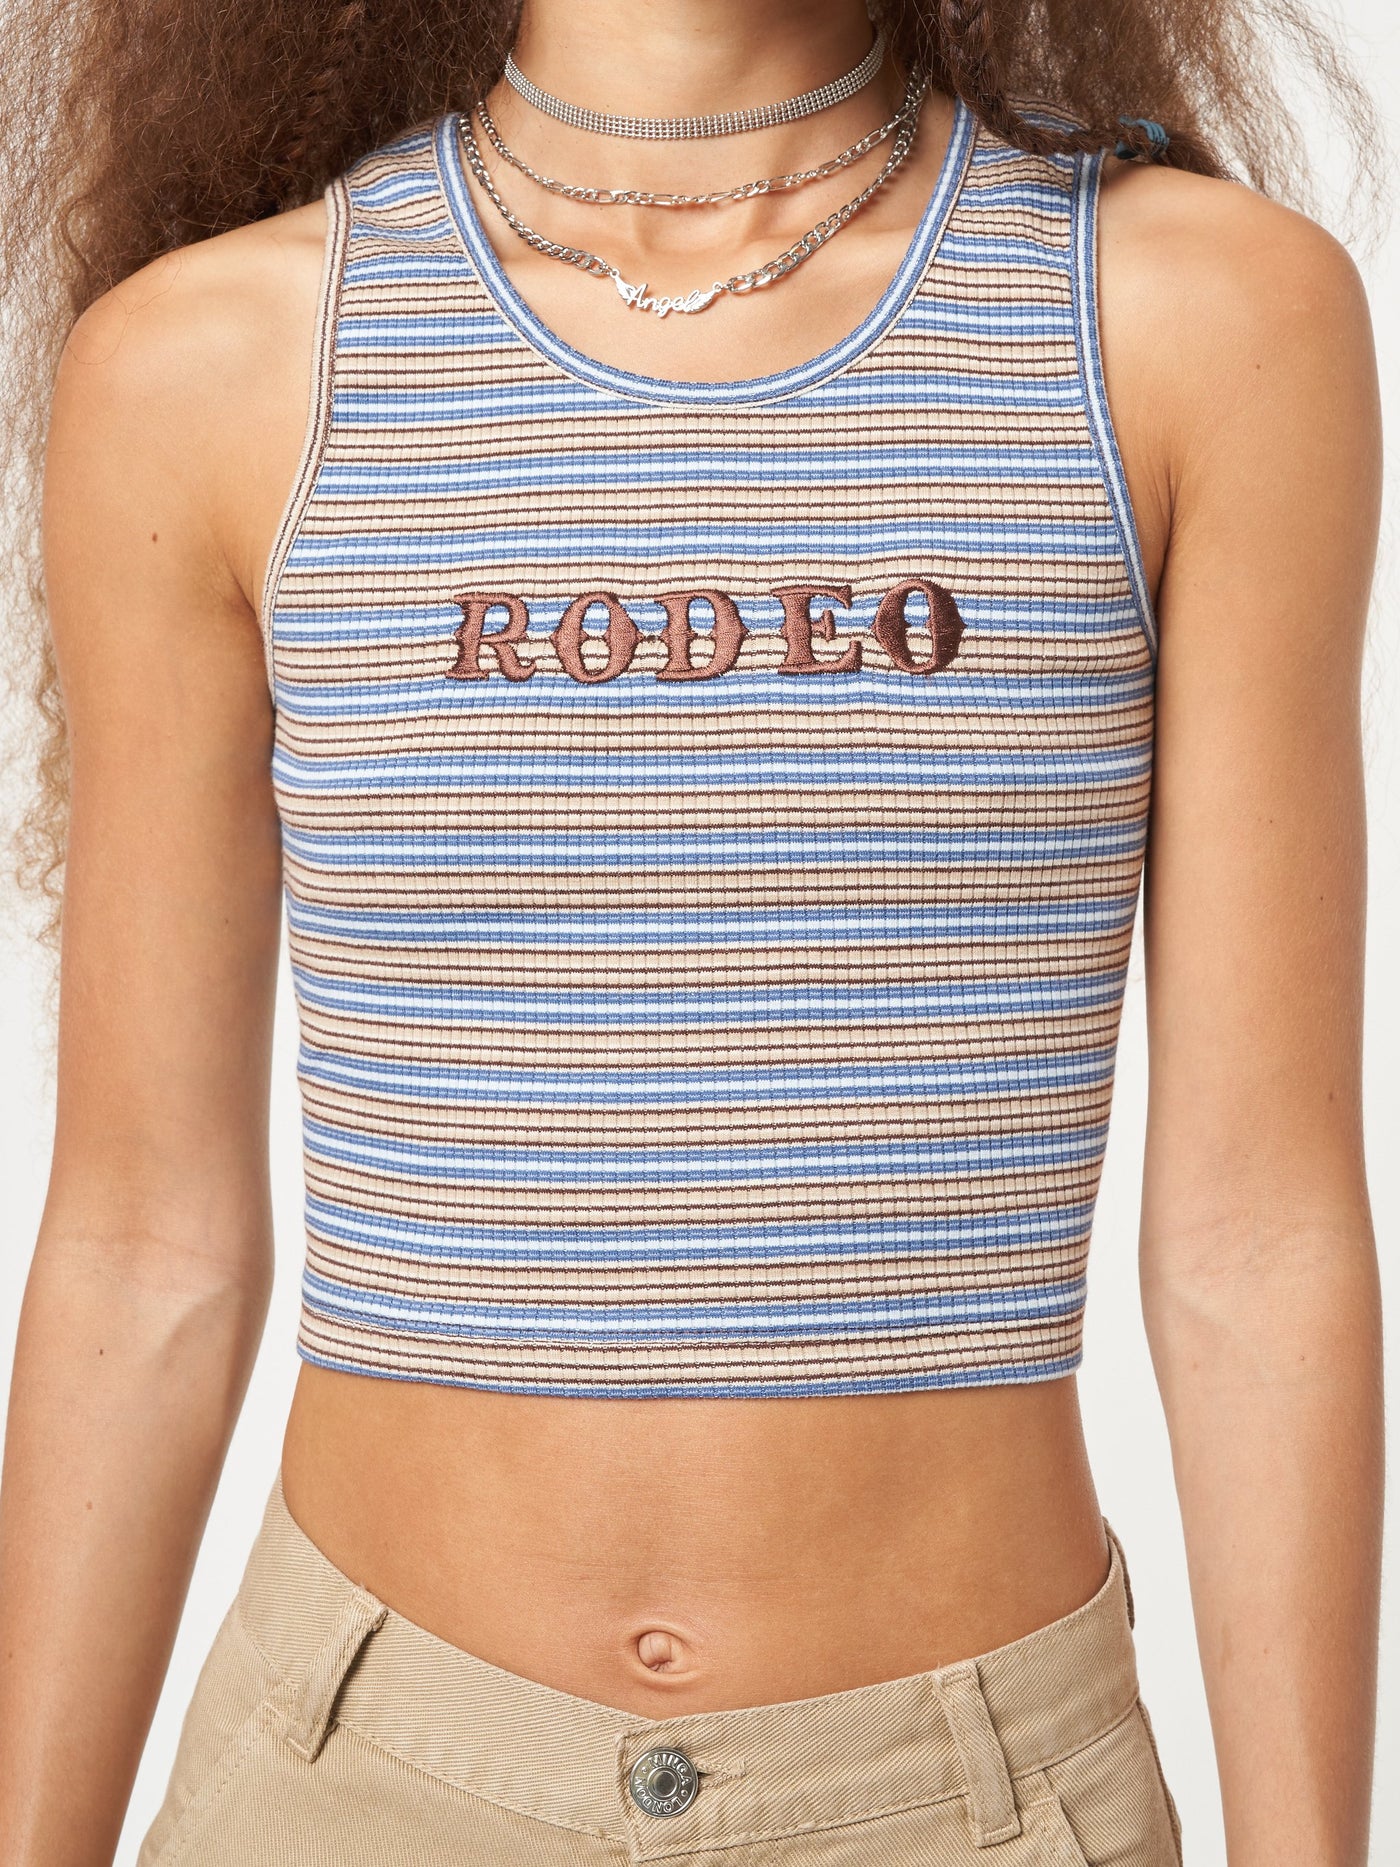 Ribbed vest top in blue, beige and brown stripes with rodeo chest embroidery